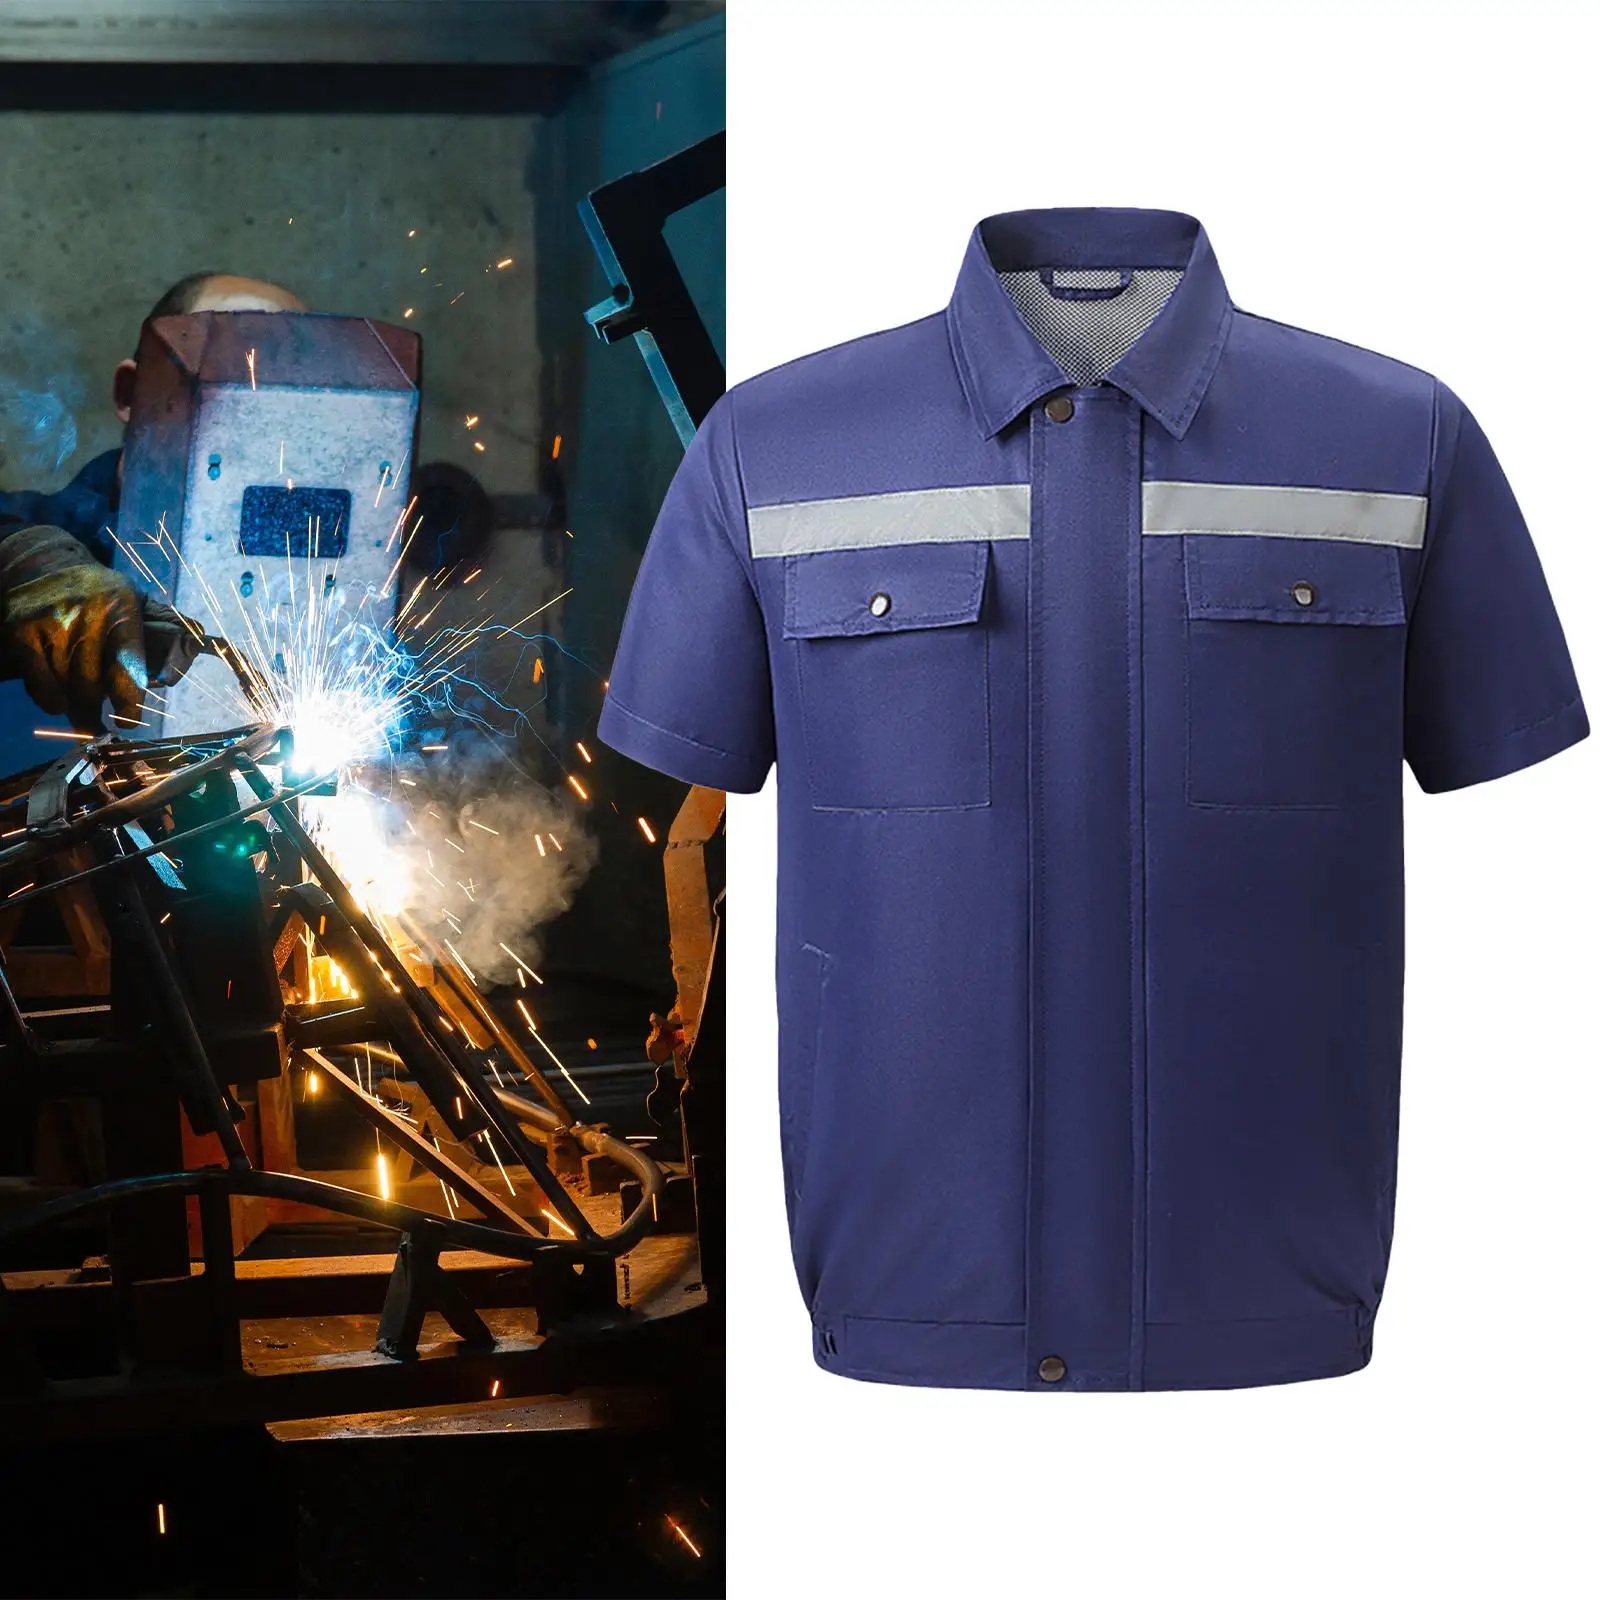 Worker Jackets Comfortable Wearable Breathable Shirt Suit Clothes Vest for Running Welding Working Hot Weather Gardening